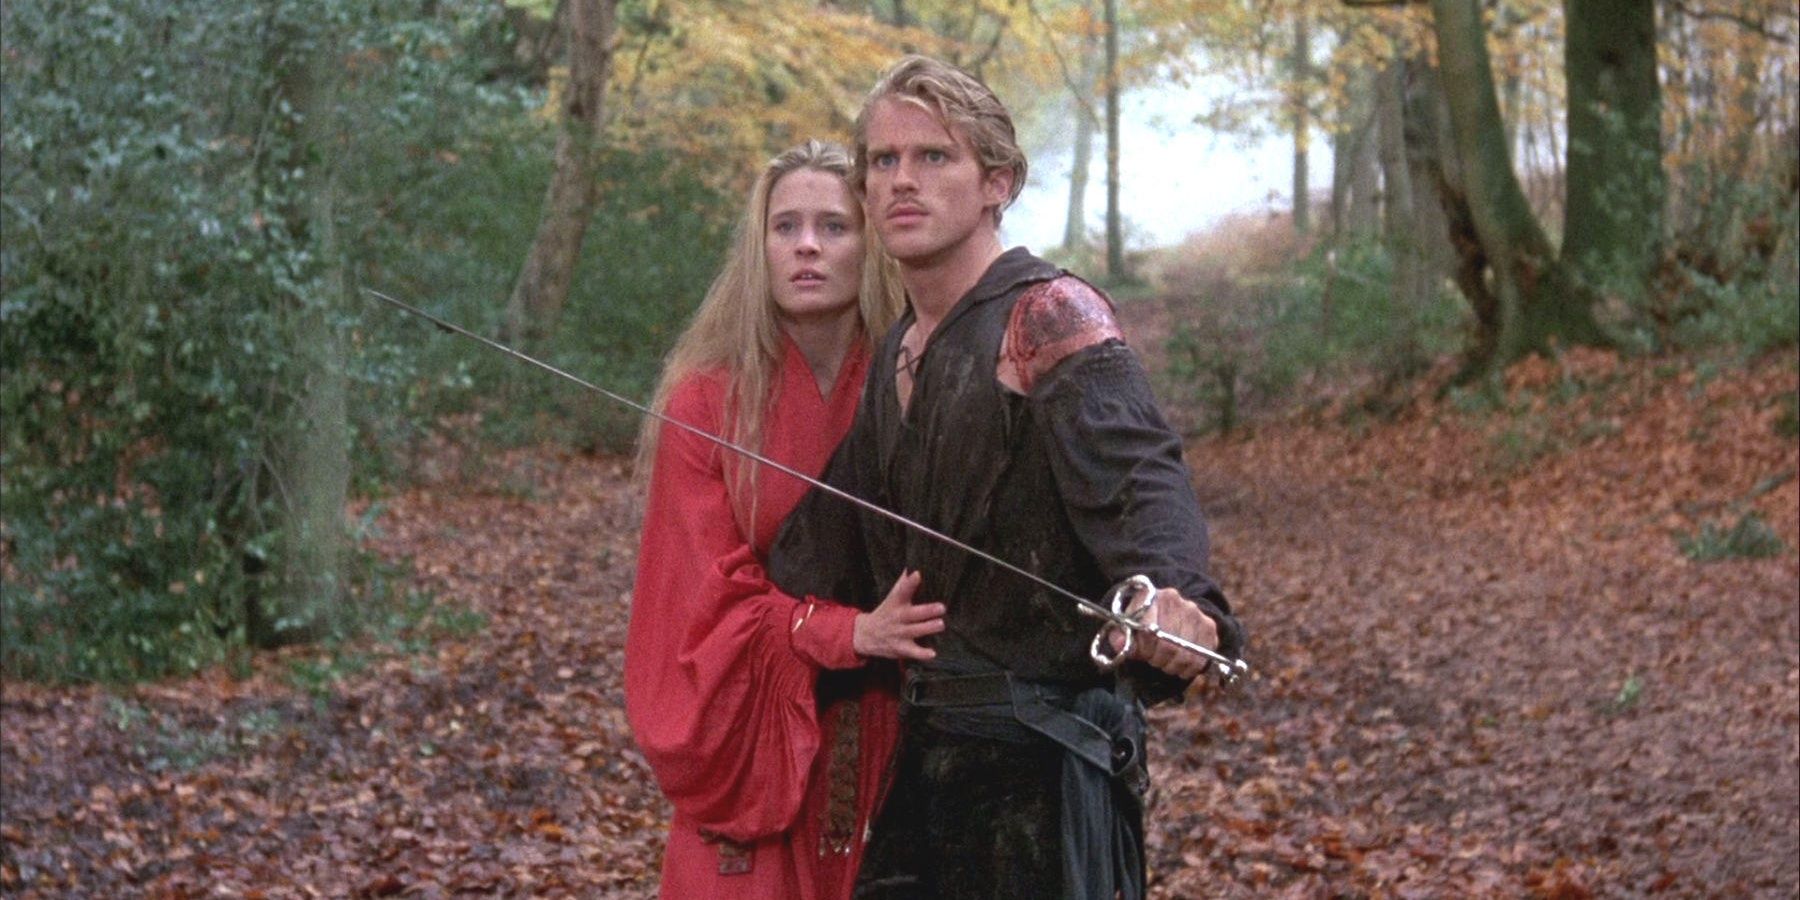 Westley draws his sword to protect Buttercup in the forest, from the movie The Princess Bride